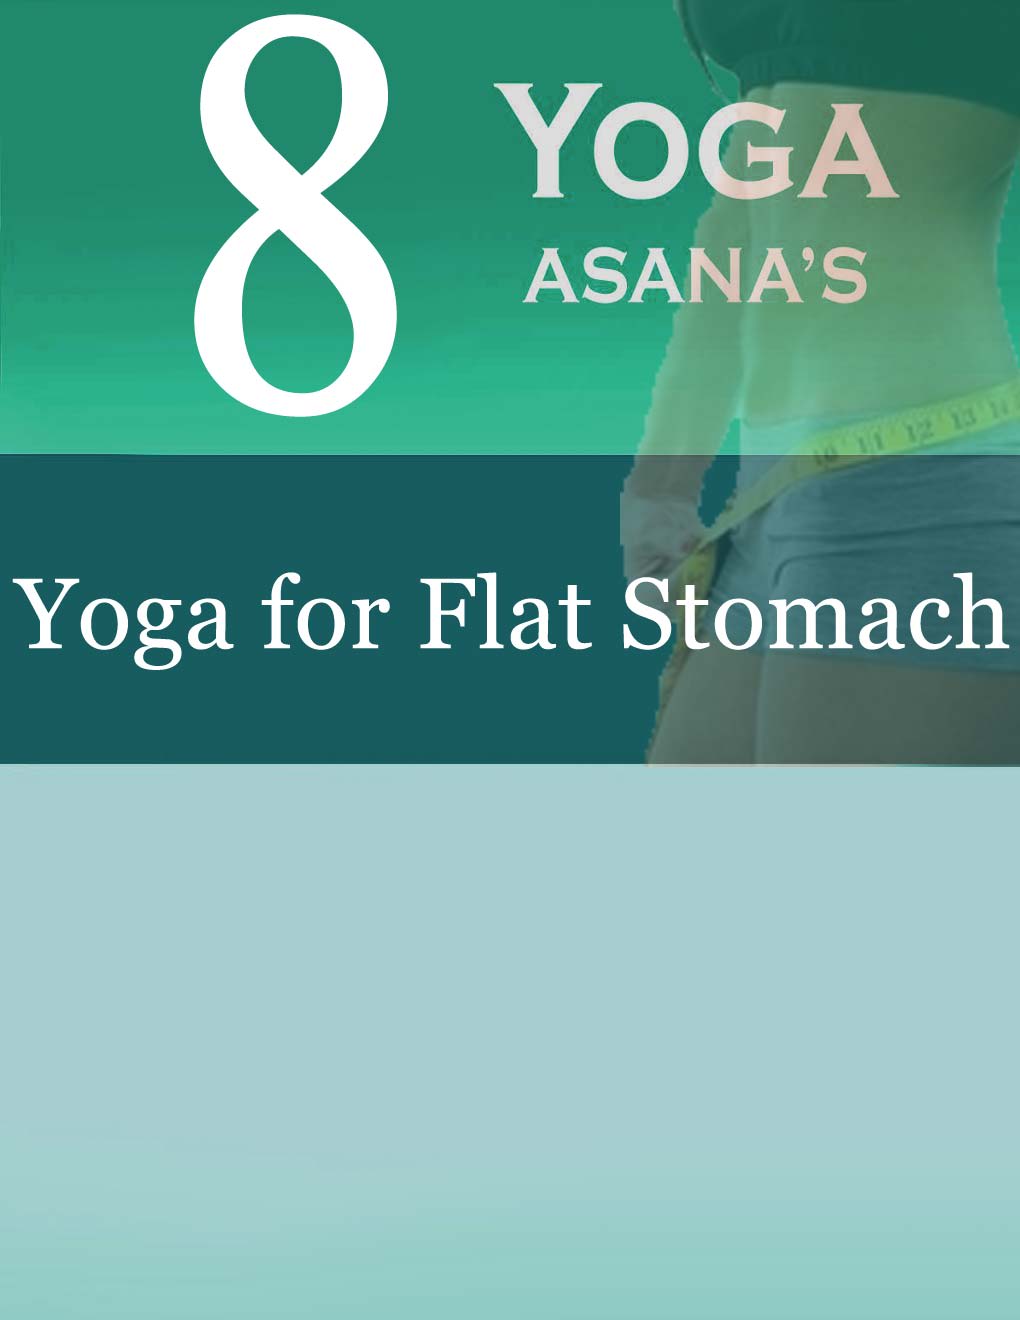 Yoga For Flat Stomach | 5 Yoga Asanas For Flat Stomach | Yoga With Mansi |  Fit Tak | Tone and strengthen your Core Muscles and get a flat stomach with  the